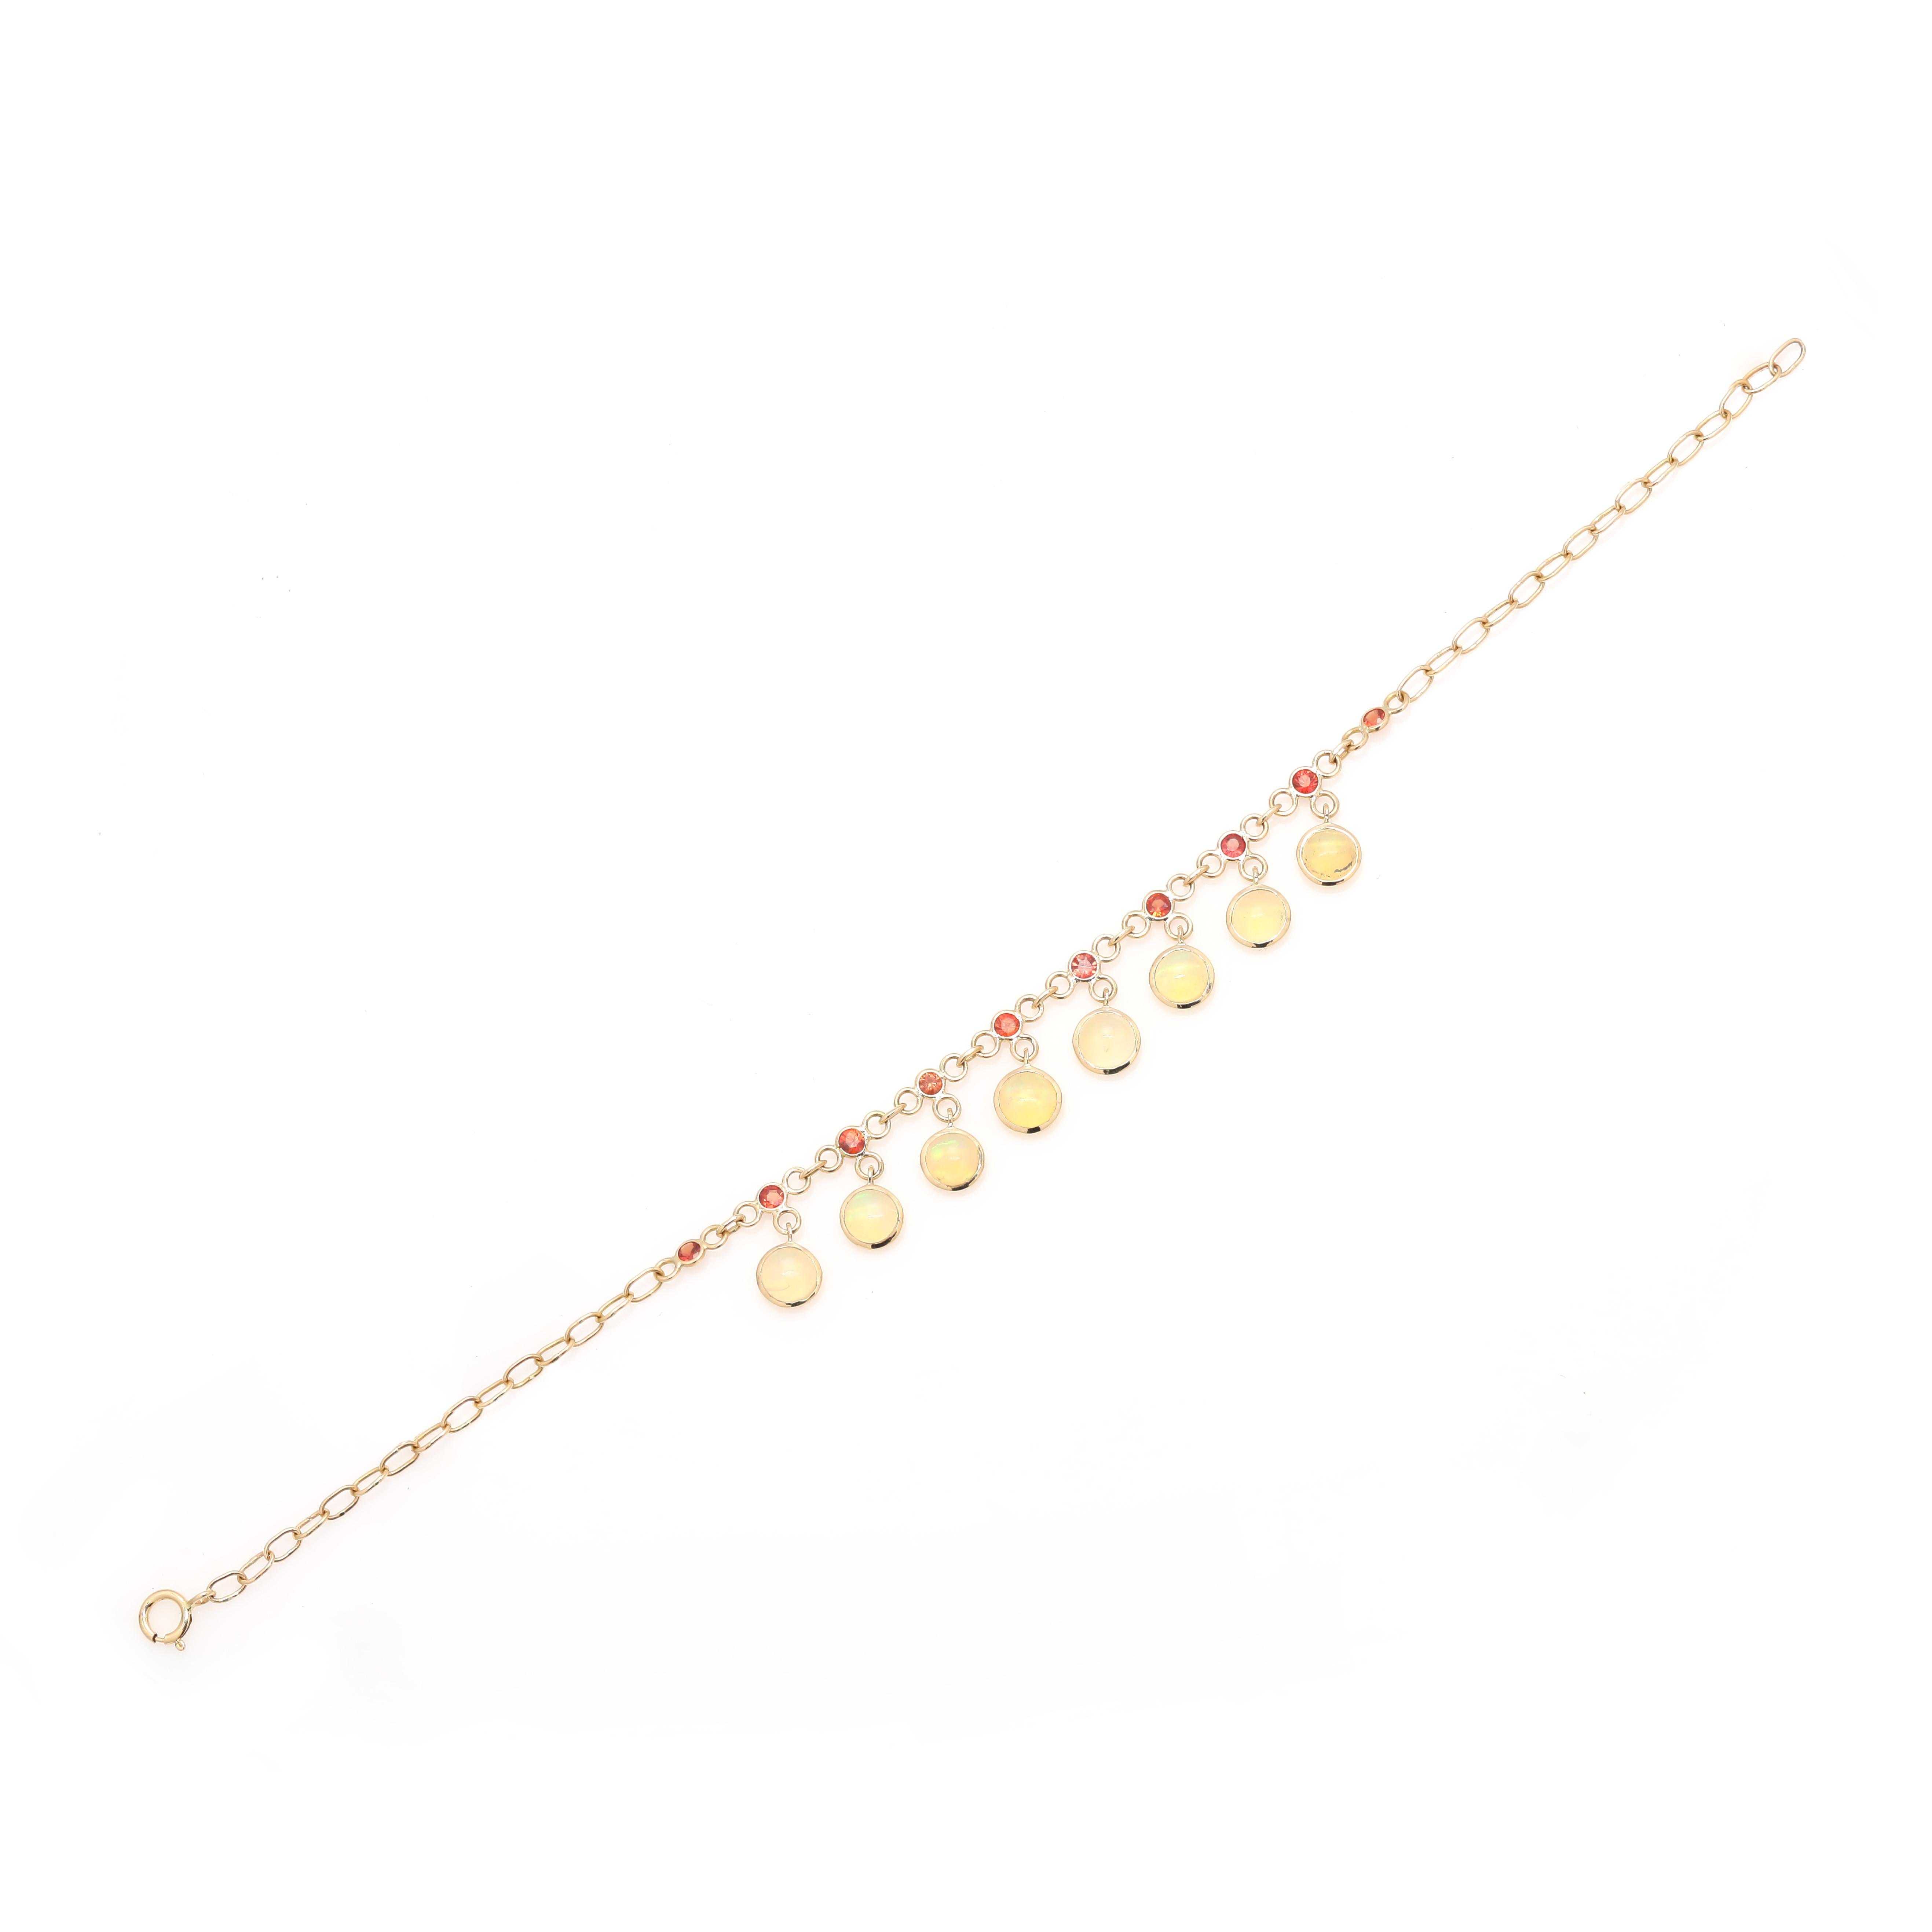 This Minimalist Sapphire Chain Bracelet with Dangling Opal in 18K gold showcases 18 endlessly sparkling natural sapphire and opal, weighing 3.08 carats. It measures 7.5 inches long in length. Sapphire stimulates concentration and reduces stress and